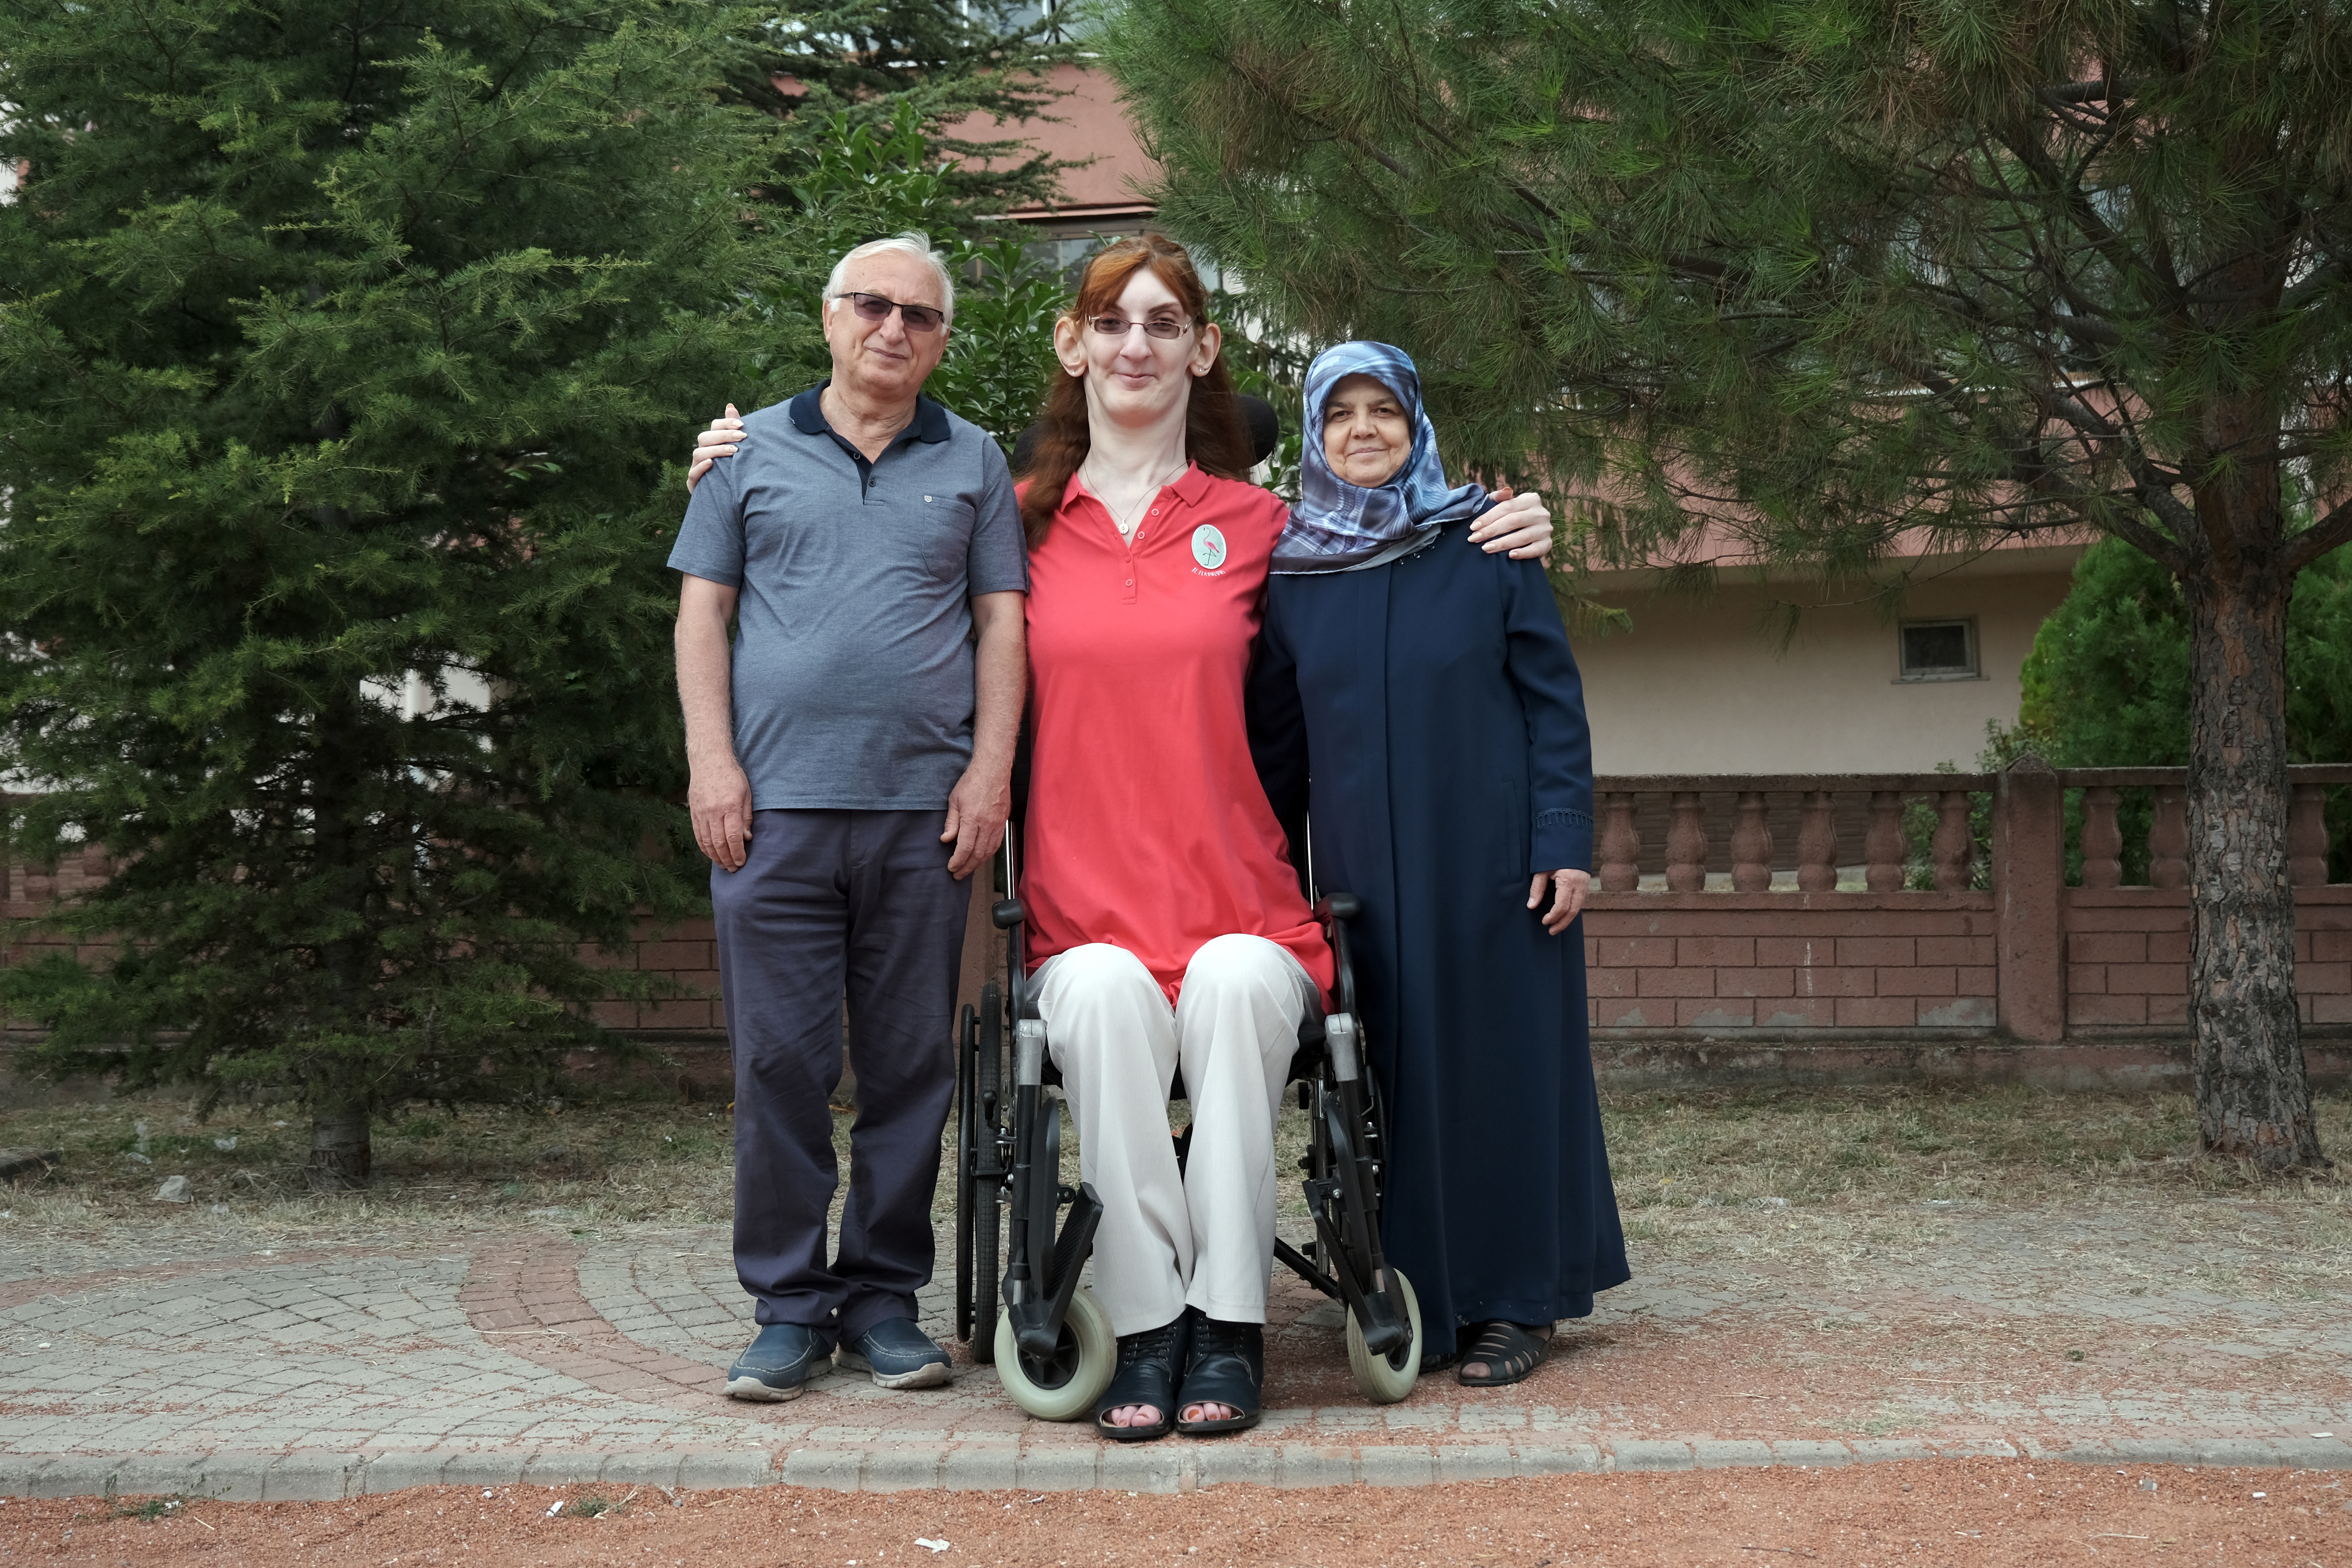 Rumeysa Gelgi is the tallest woman in the world